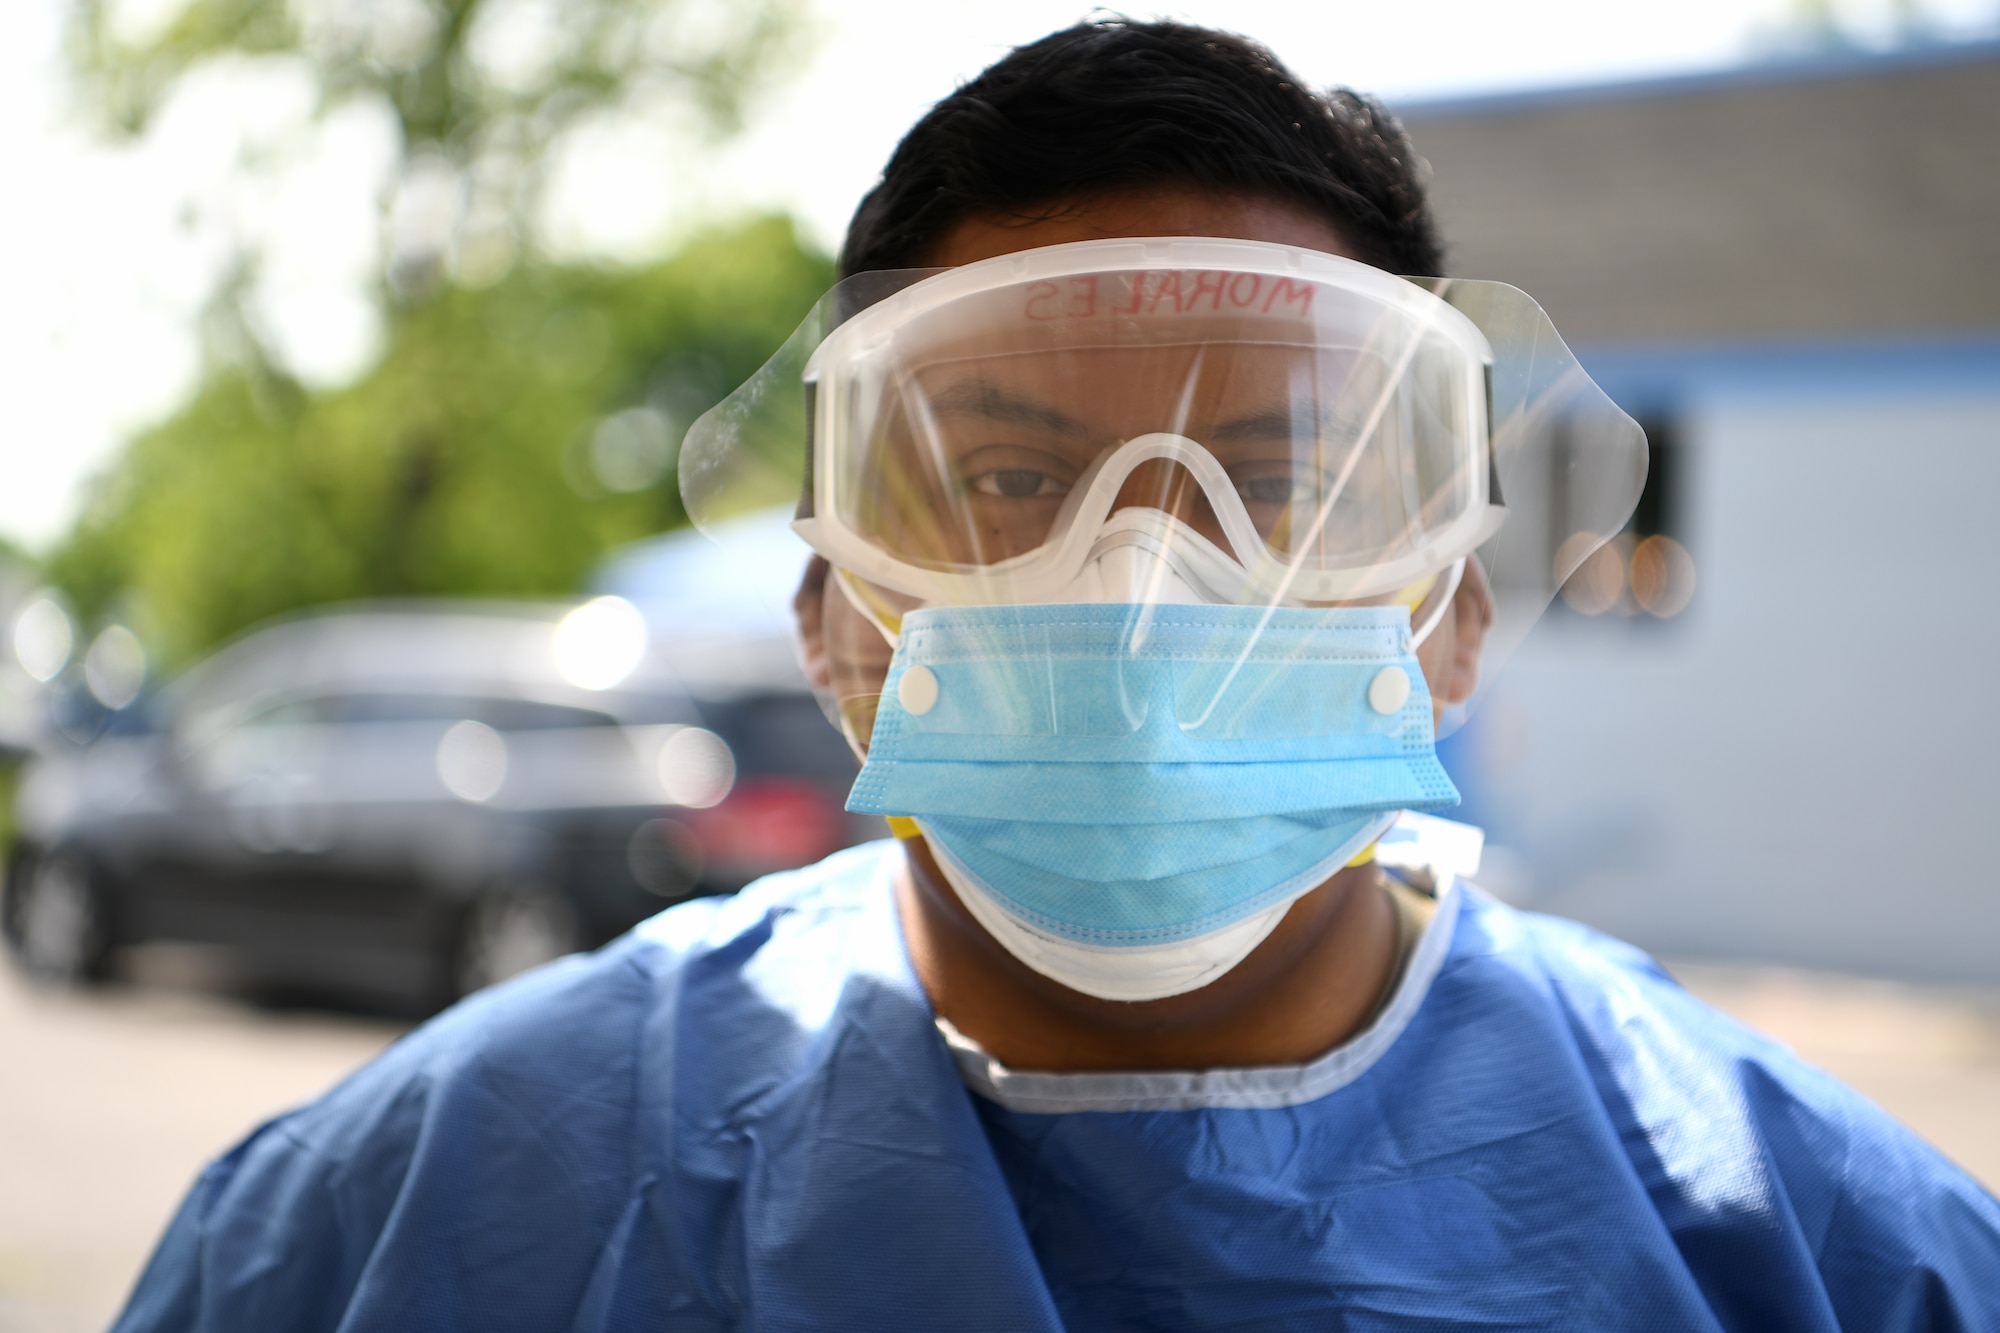 Staff Sgt. Luis Morales, a dental technician assigned to the 178th Medical Group, poses for a photo June 17, 2020 at Community Building Institute in Middletown, Ohio. Airmen from the 178th Wing and Soldiers assigned to the Ohio National Guard augmented staff members of Centerpoint Health to help with drive-thru Coronavirus testing of local community members. (U.S. Air National Guard photo by Staff Sgt. Amber Mullen)